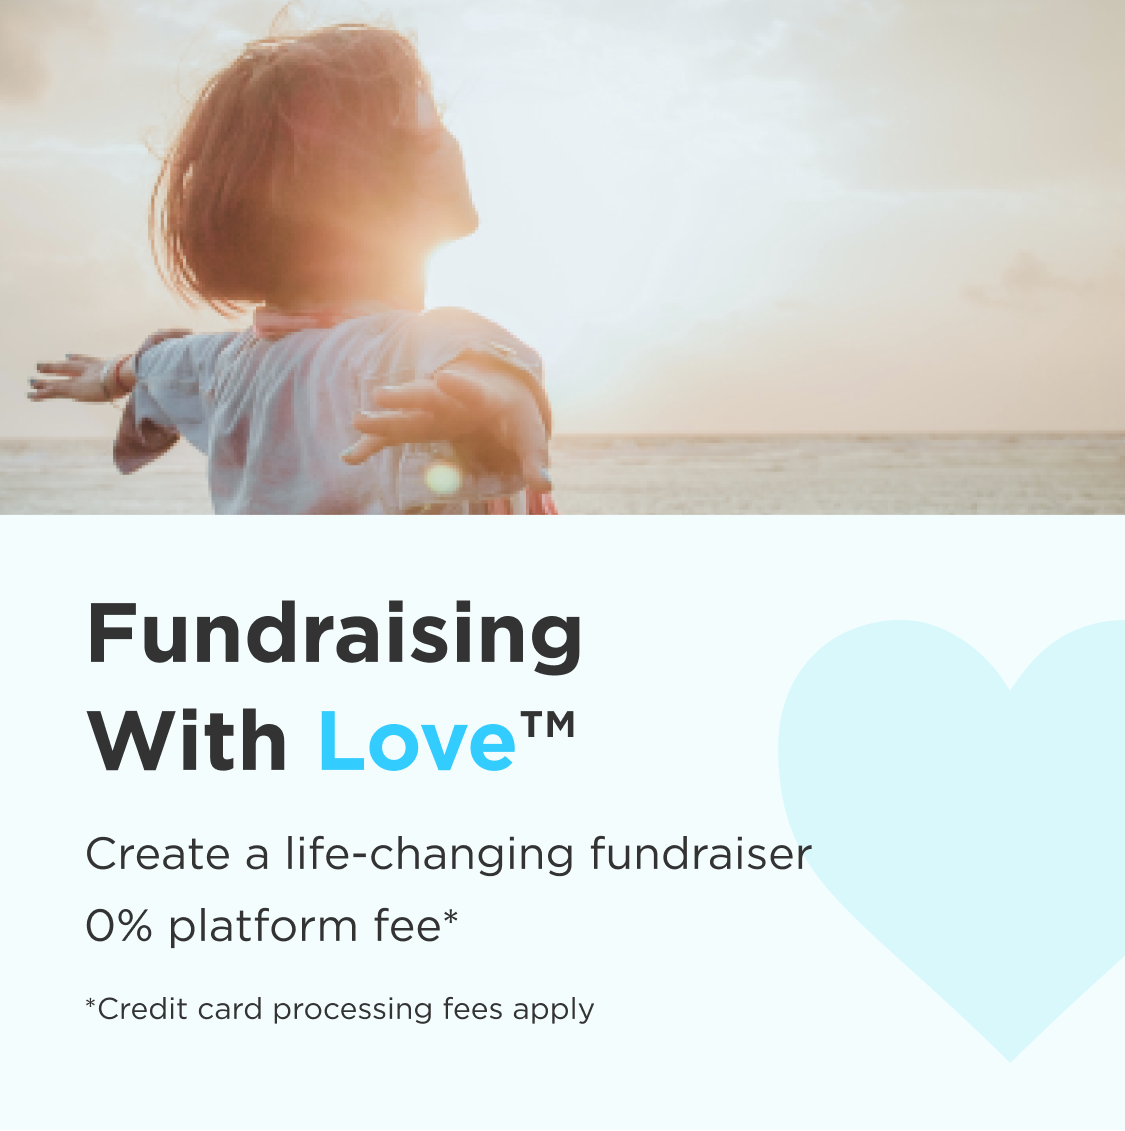 AngeLink fundraising with love